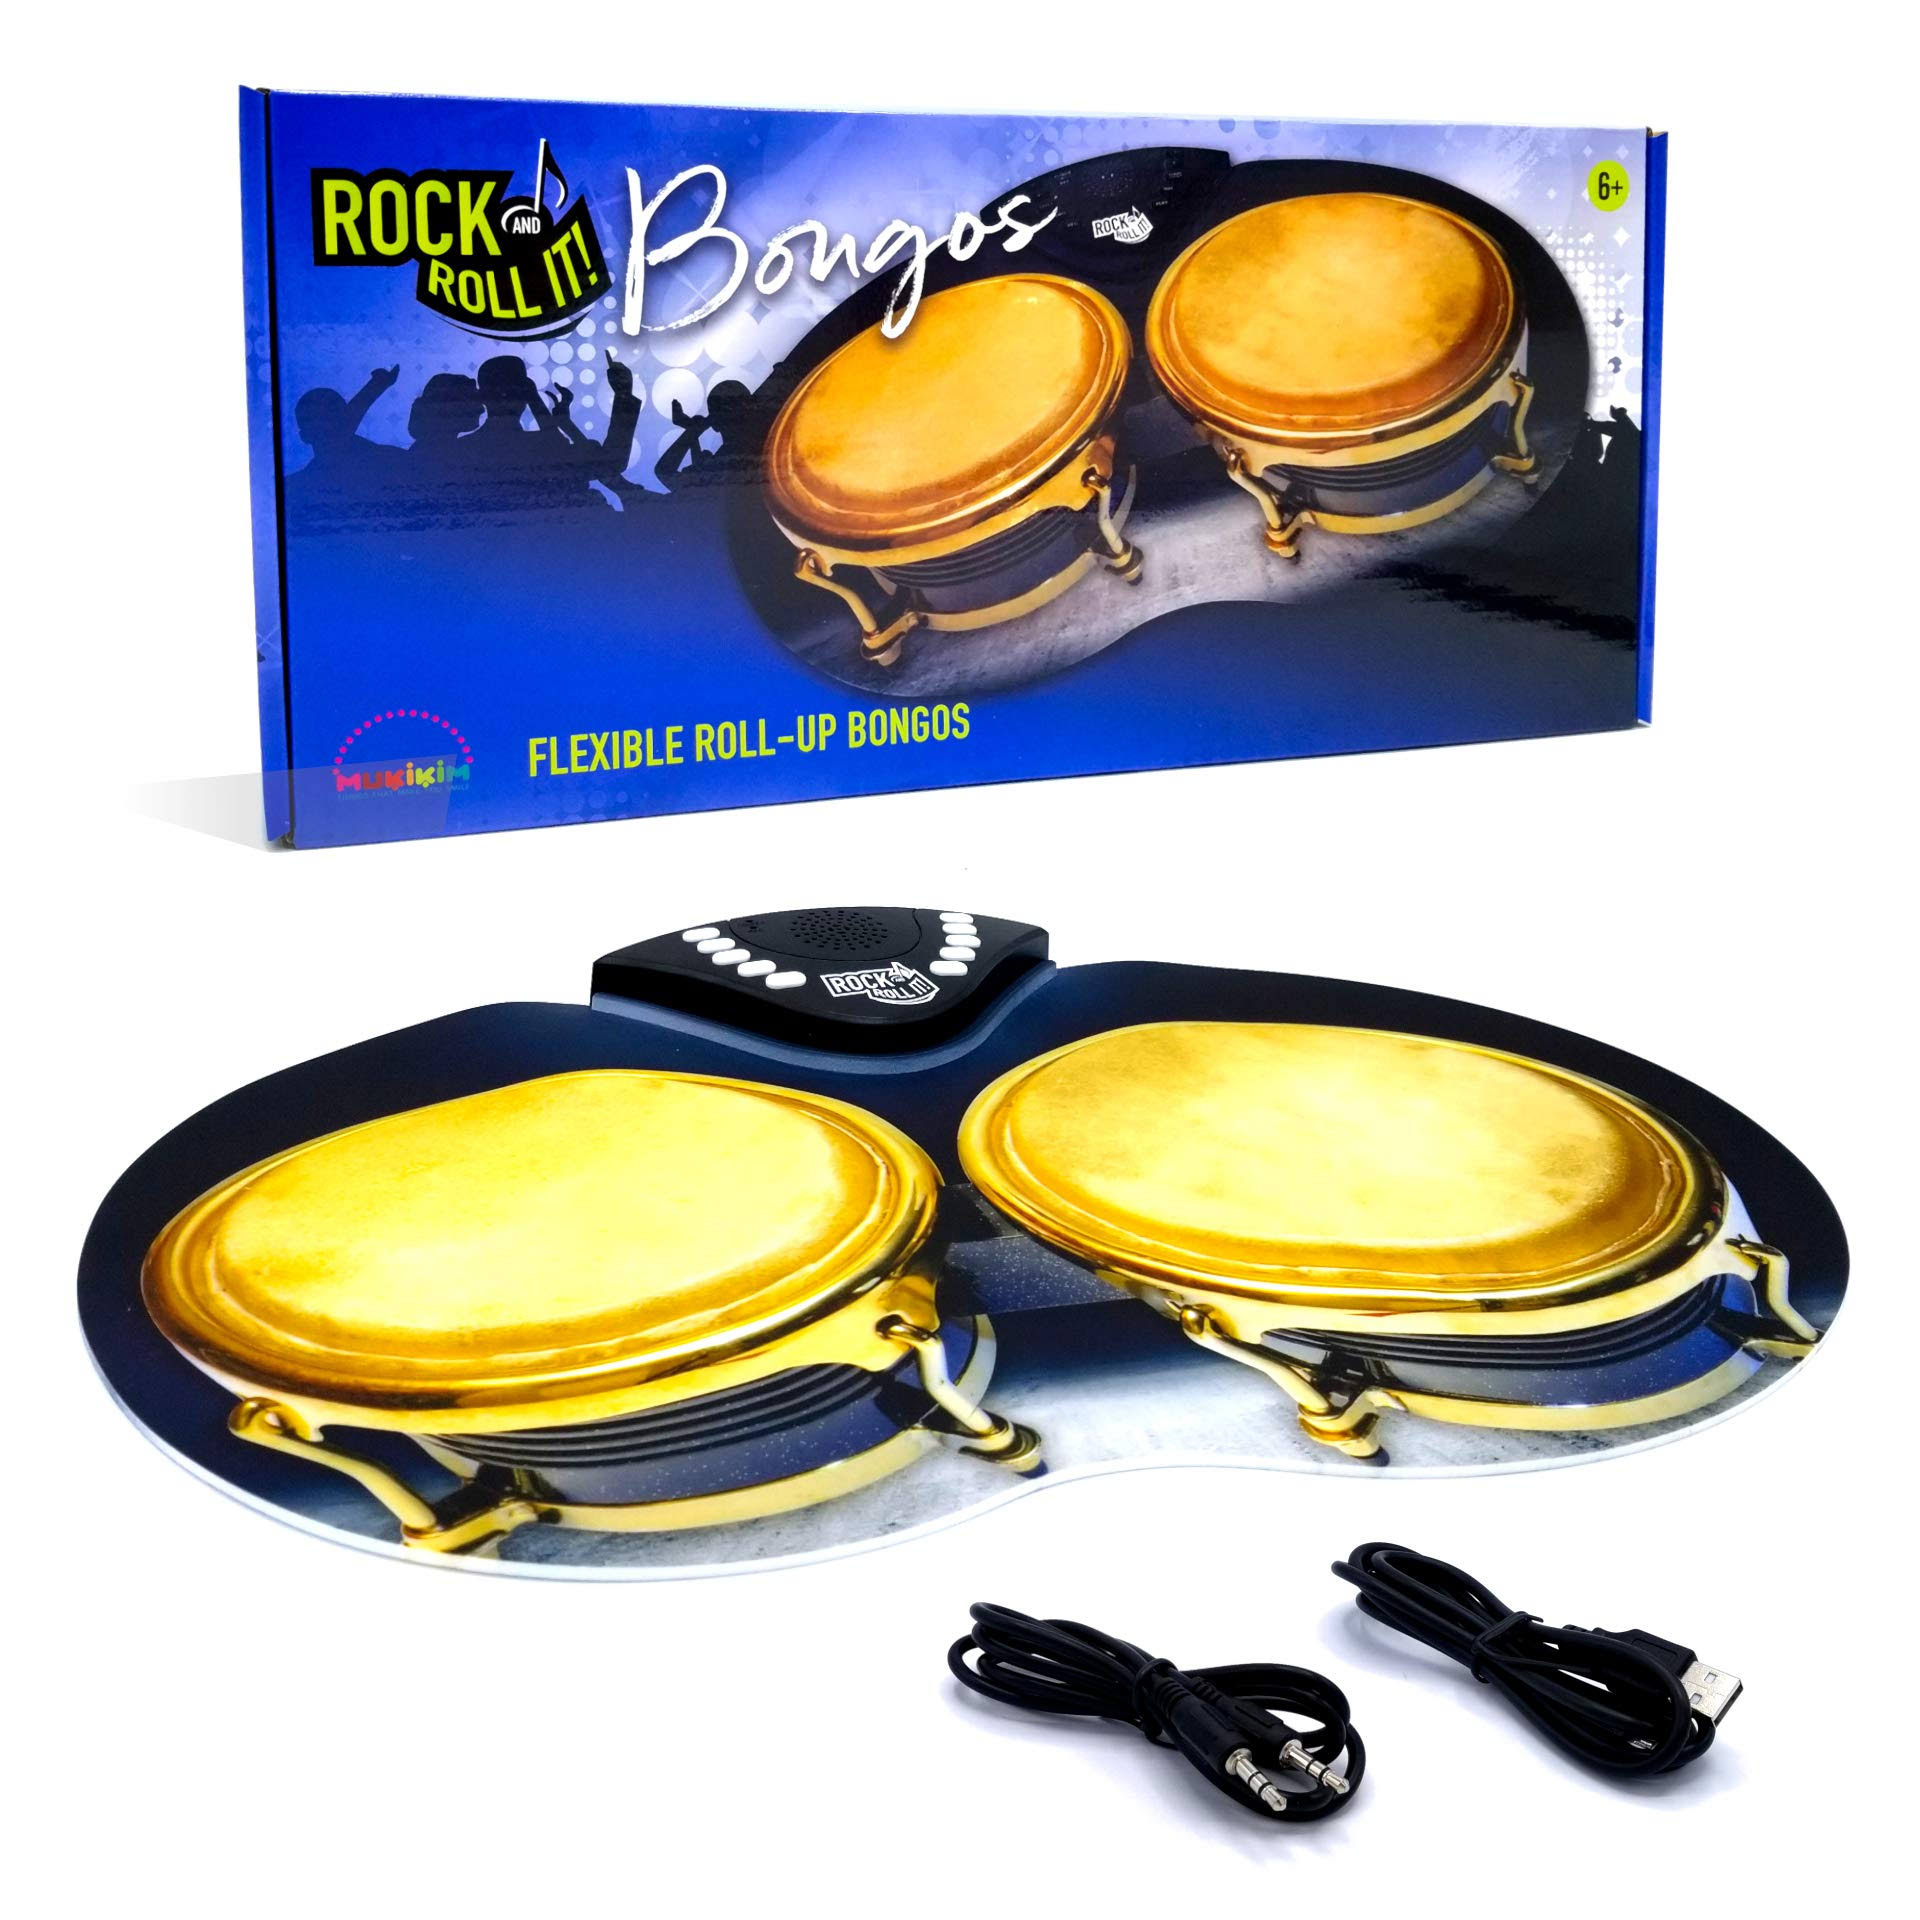 Rock and Roll It Bongos. Flexible & Portable Electronic Hand Drum Pad